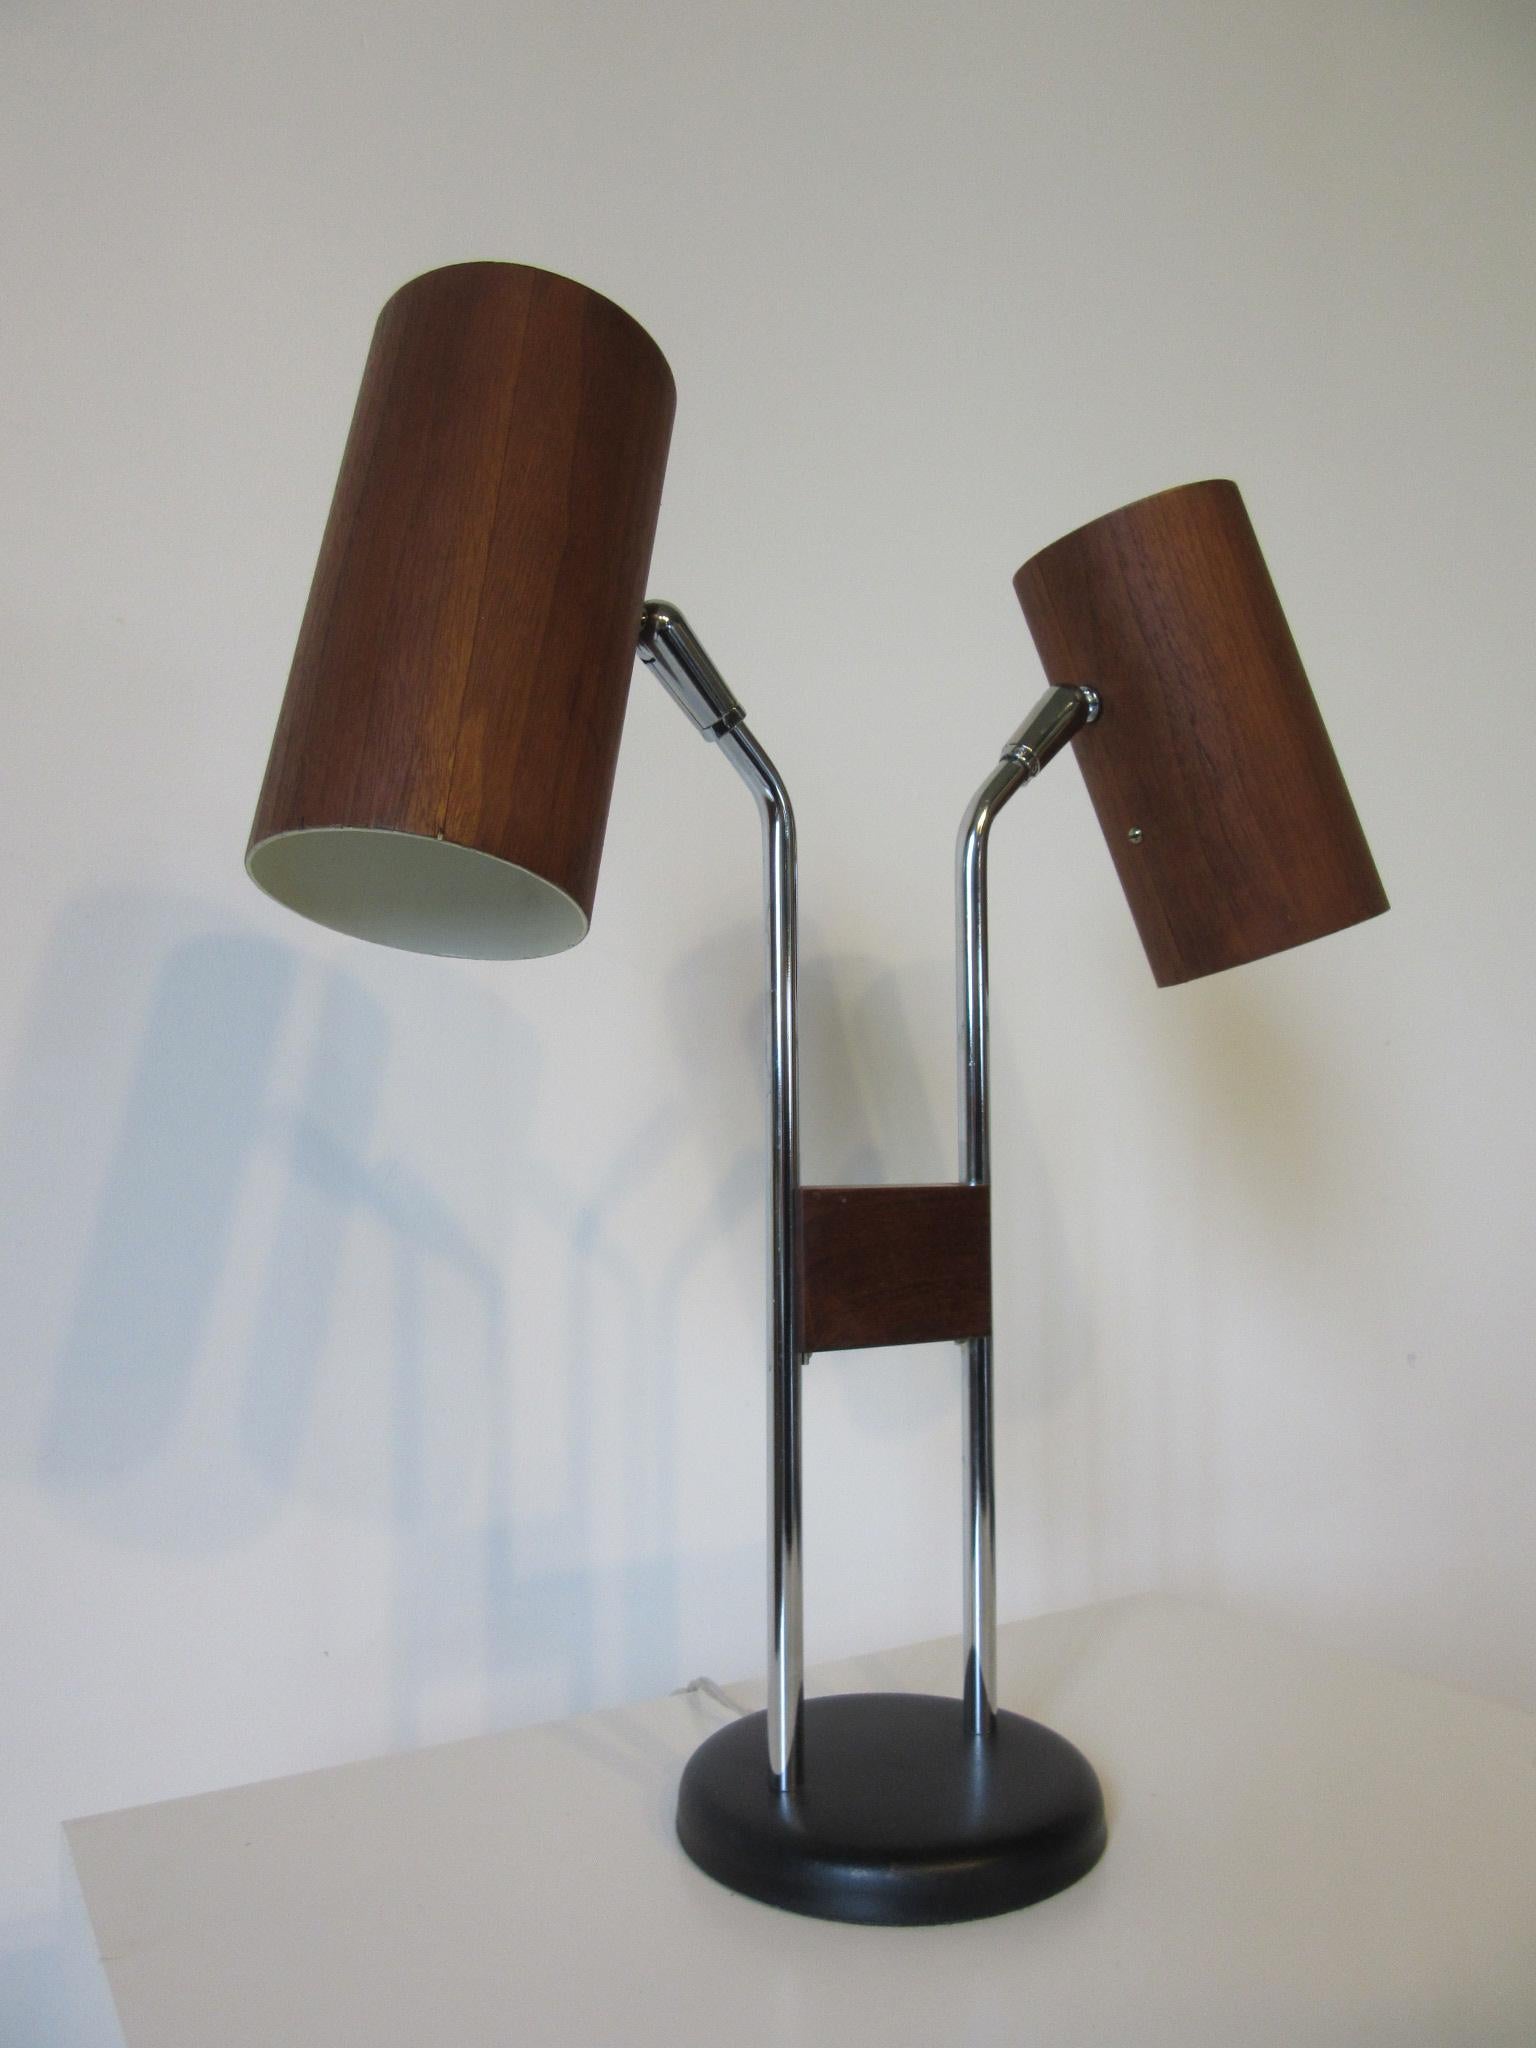 An adjustable swiveling double-headed table lamp with walnut veneer wrapped cylinder shades mounted on polished chromed stems held together by a piece of walnut with a satin black metal base. The three-way light switches to the tops of each cylinder